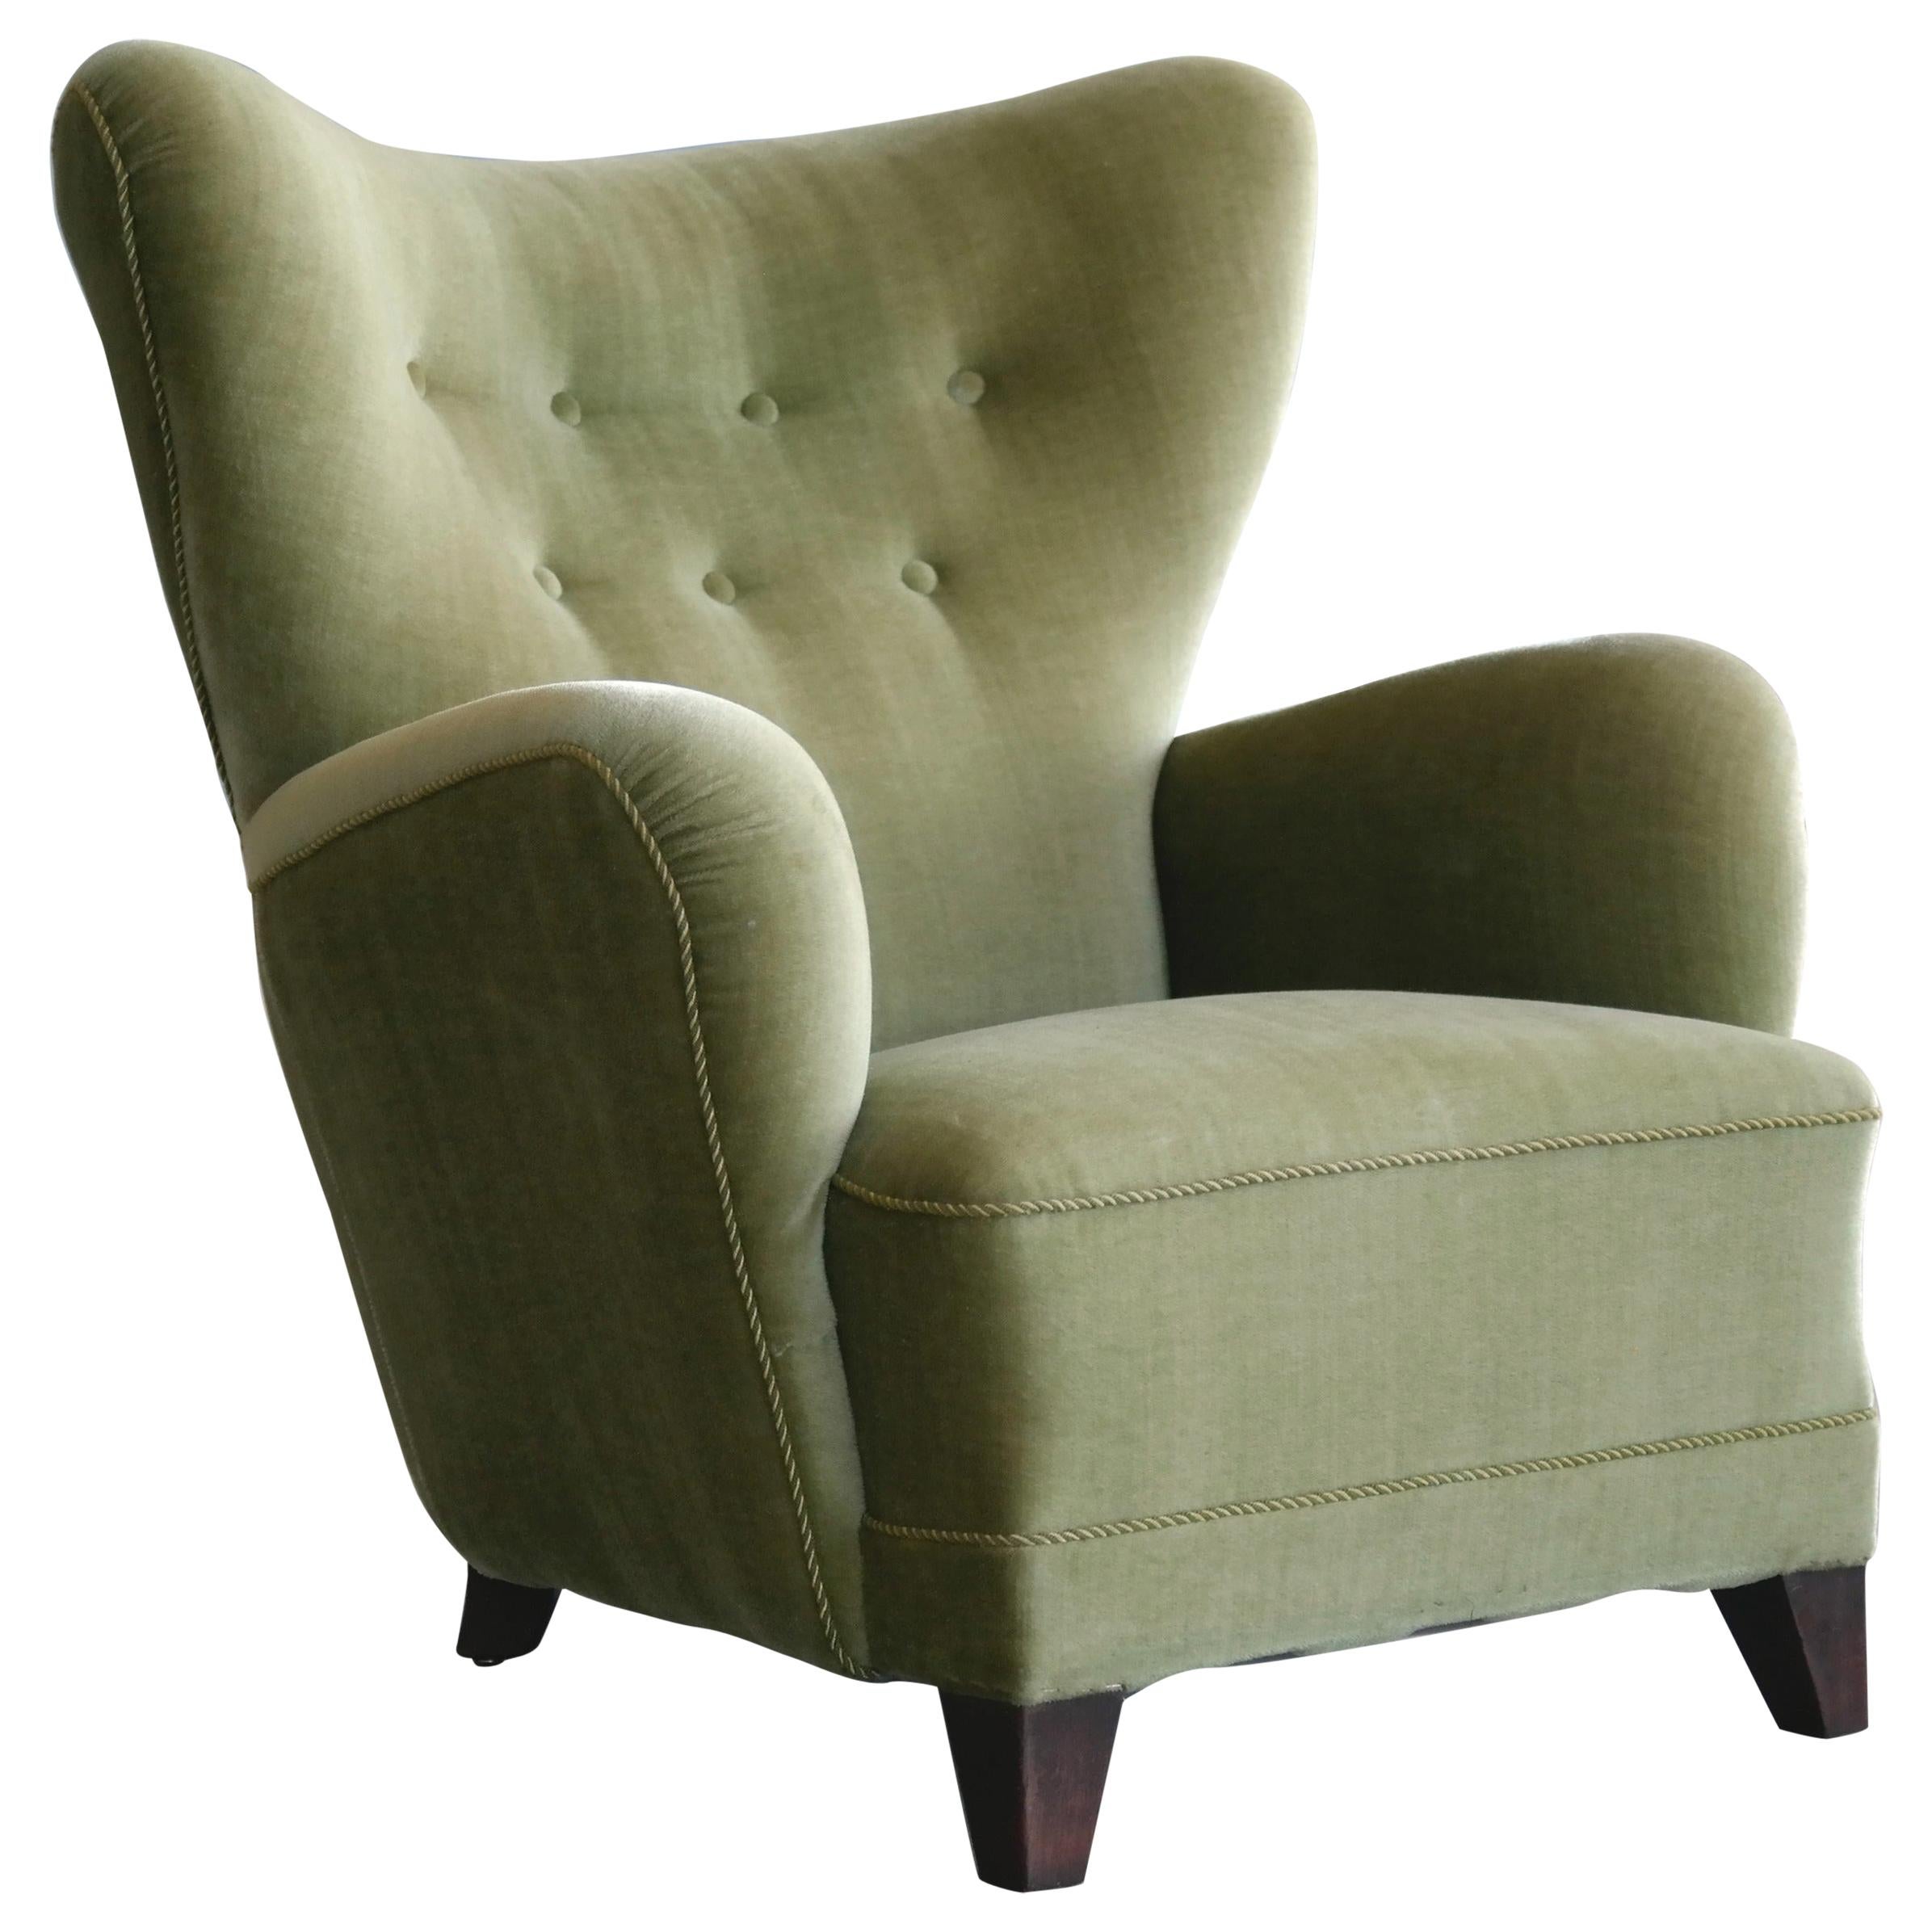  1940s Lassen Style Easy Chair in Original Mohair Fabric